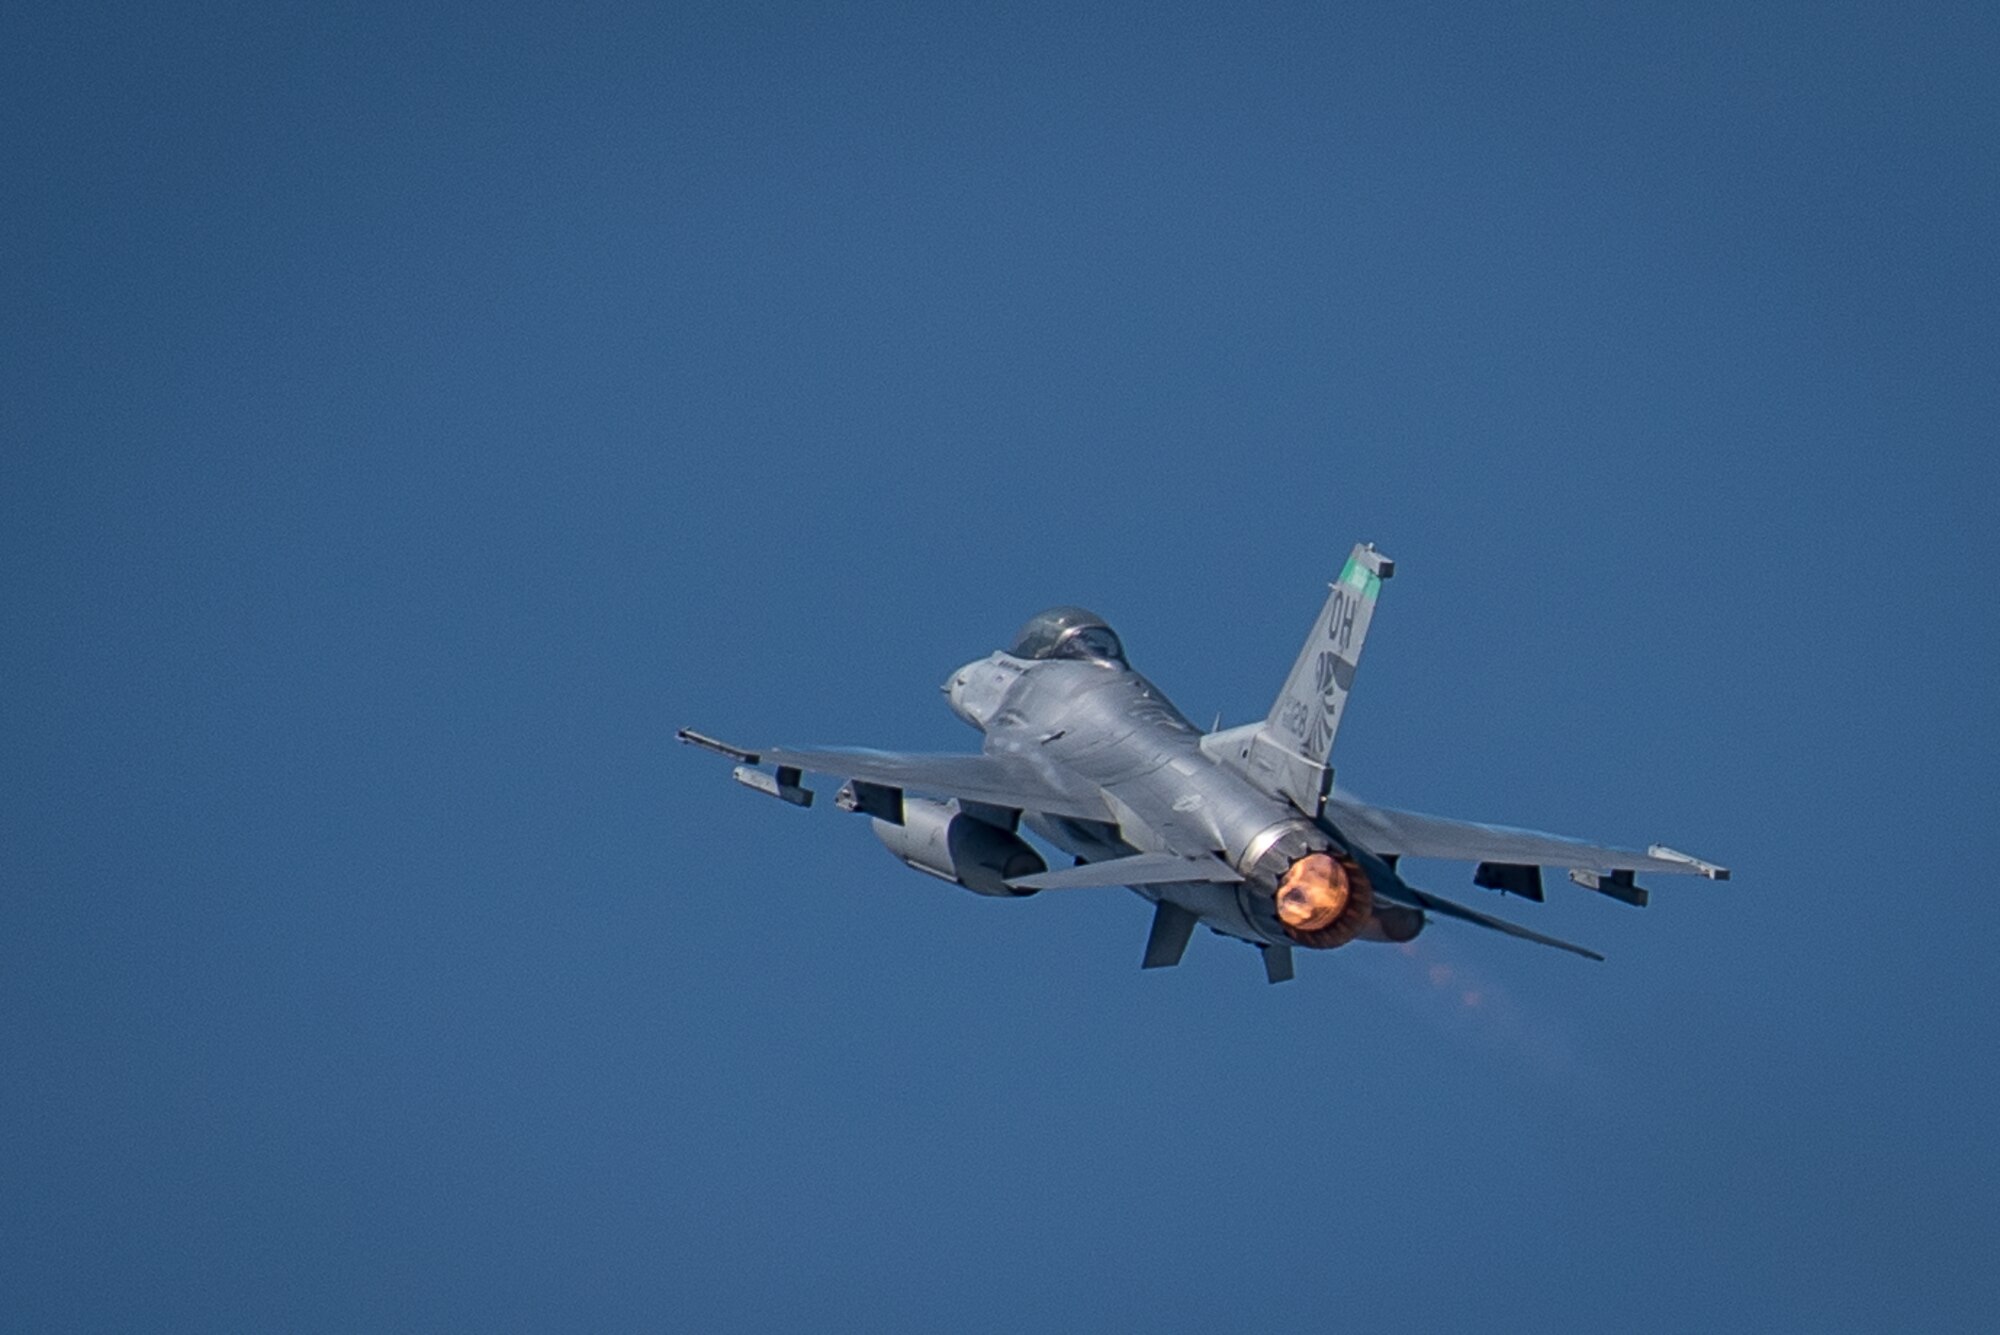 An F-16 Falcon from the Ohio Air National Guard’s 180th Fighter Wing steaks over the Ohio River during the annual Thunder Over Louisville airshow in Louisville, Ky., April 13, 2019. Hundreds of thousands of spectators turned out to view the event, which has grown to become one of the largest single-day air shows in North America. (U.S. Air National Guard photo by Dale Greer)